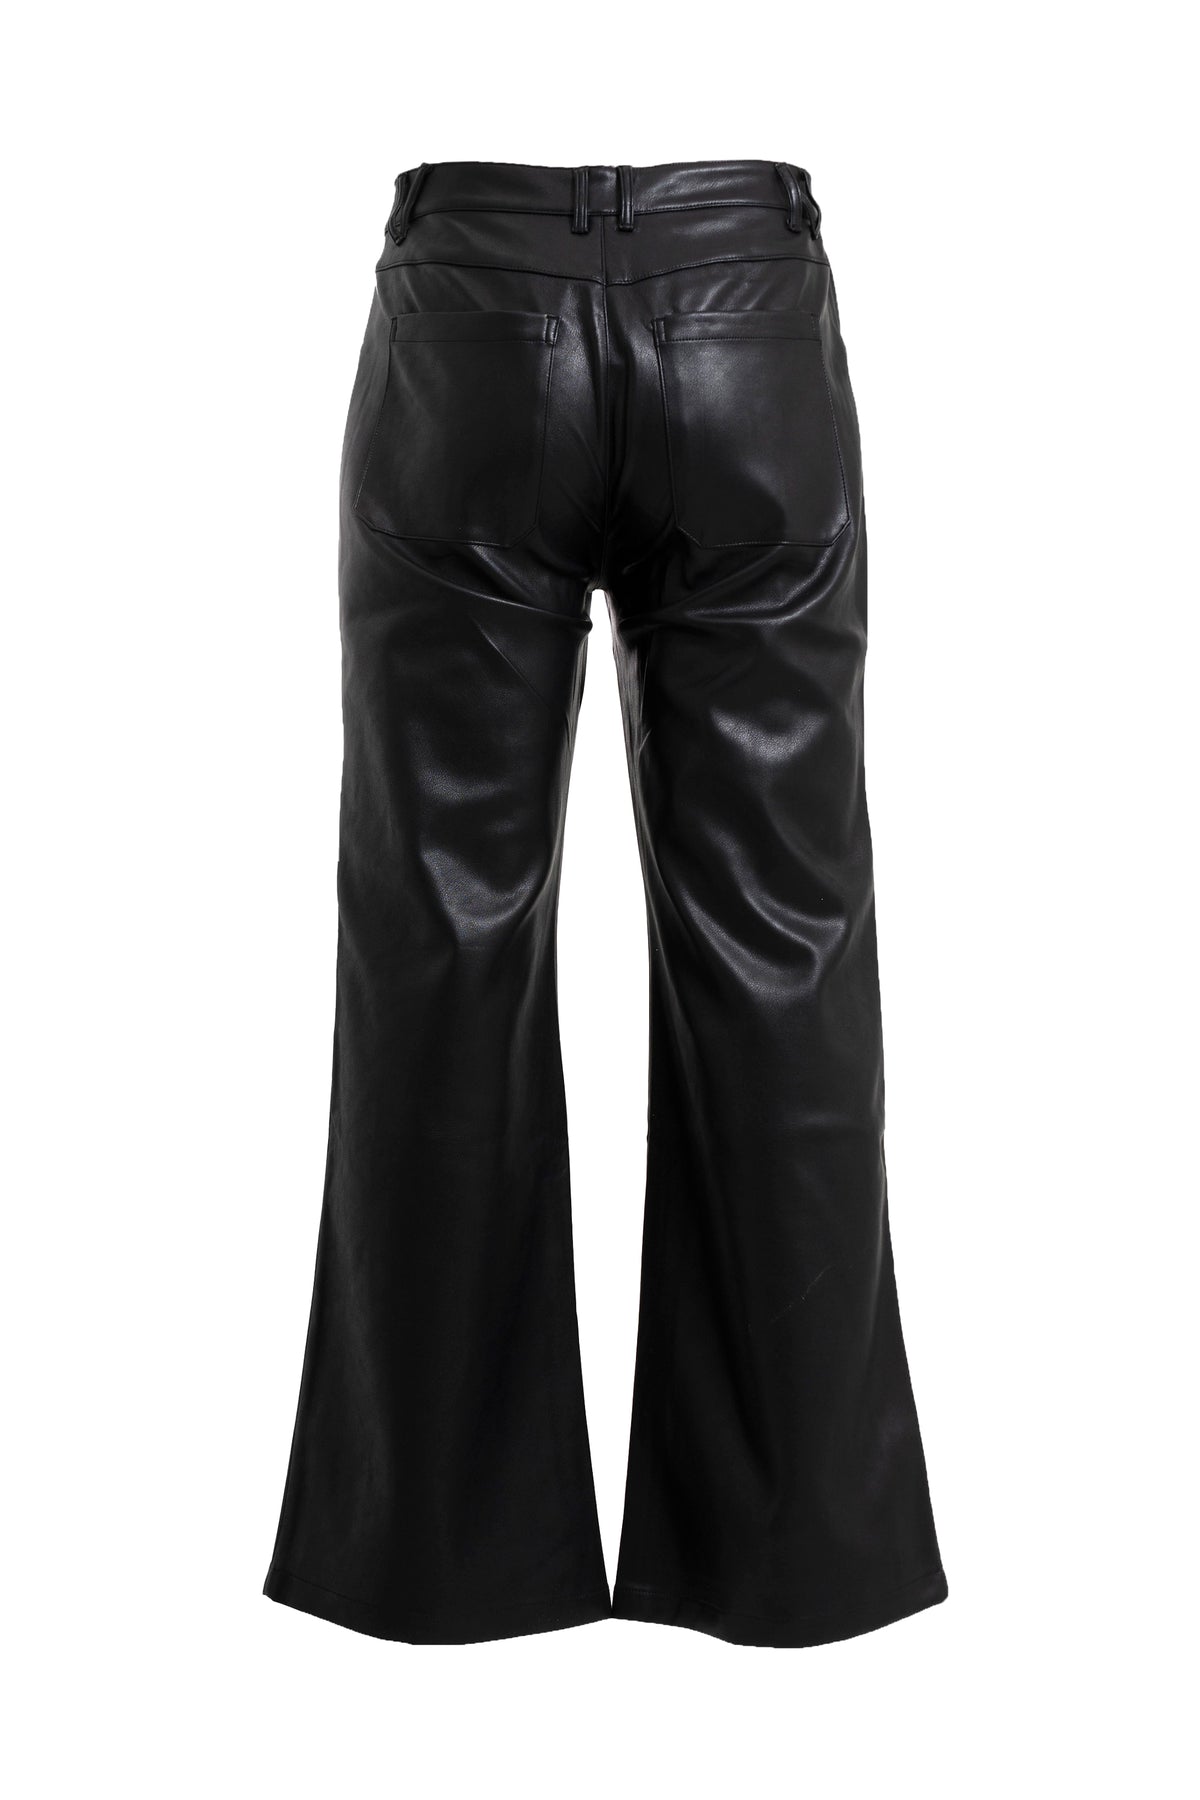 LEATHER WIDE PANTS / BLK